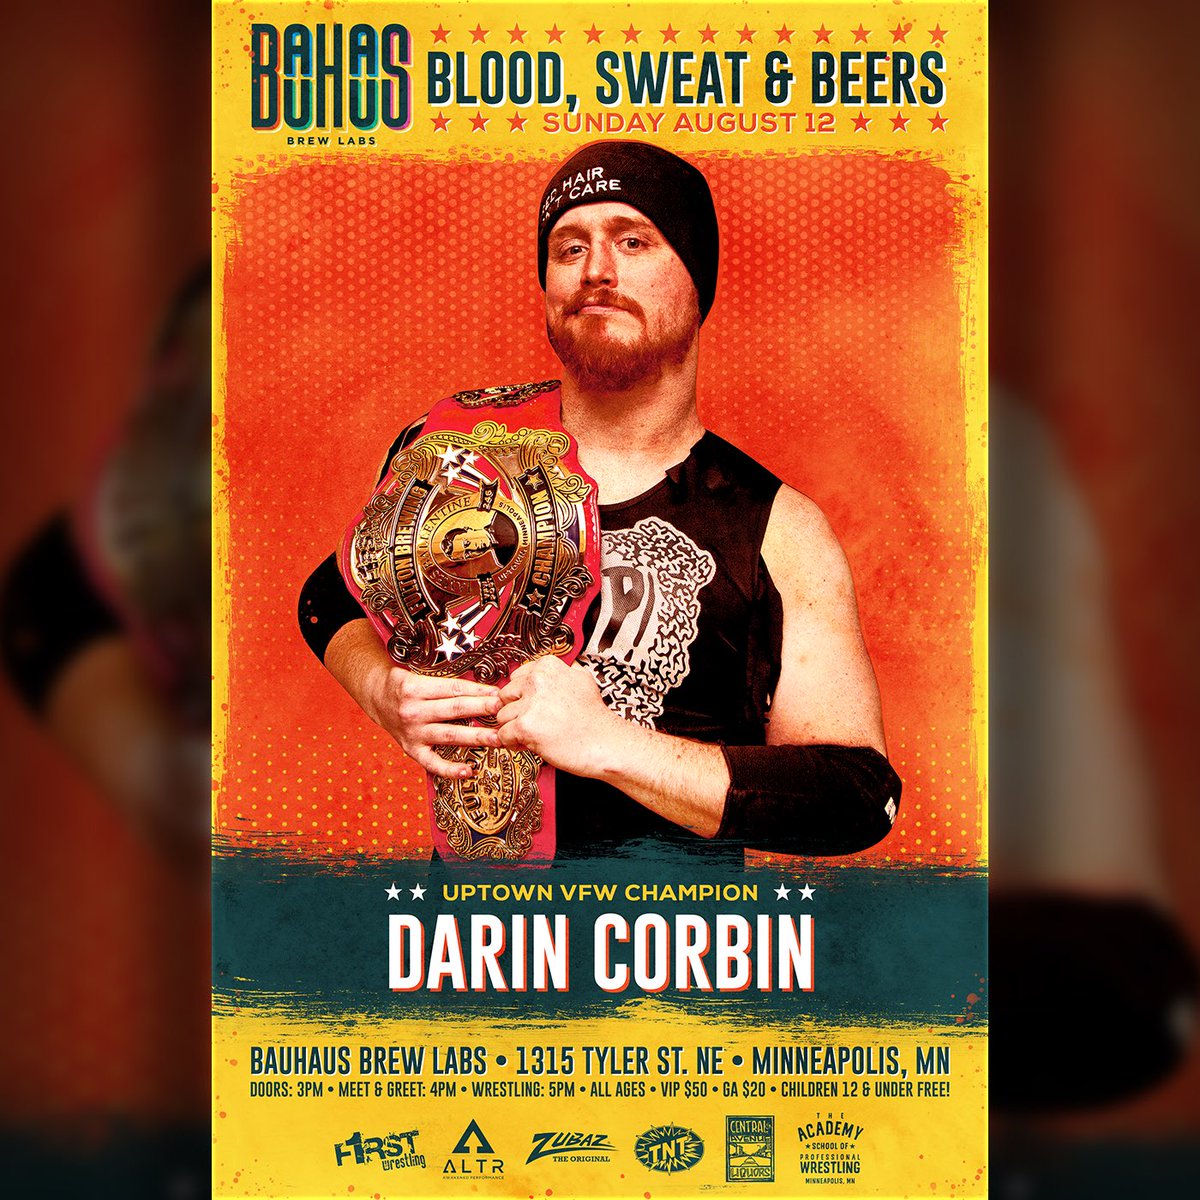 The #UptownVFWChampion, @DarinCorbin is coming to BLOOD, SWEAT & BEERS!

SUNDAY
August 12th
@BauhausBrewLabs 
Minneapolis, MN
Doors: 3pm
VIP Meet & Greet: 4pm
Show Starts: 5pm
ALL AGES! (🍻21+)

🎟 dojour.us/e/8211-blood-s…